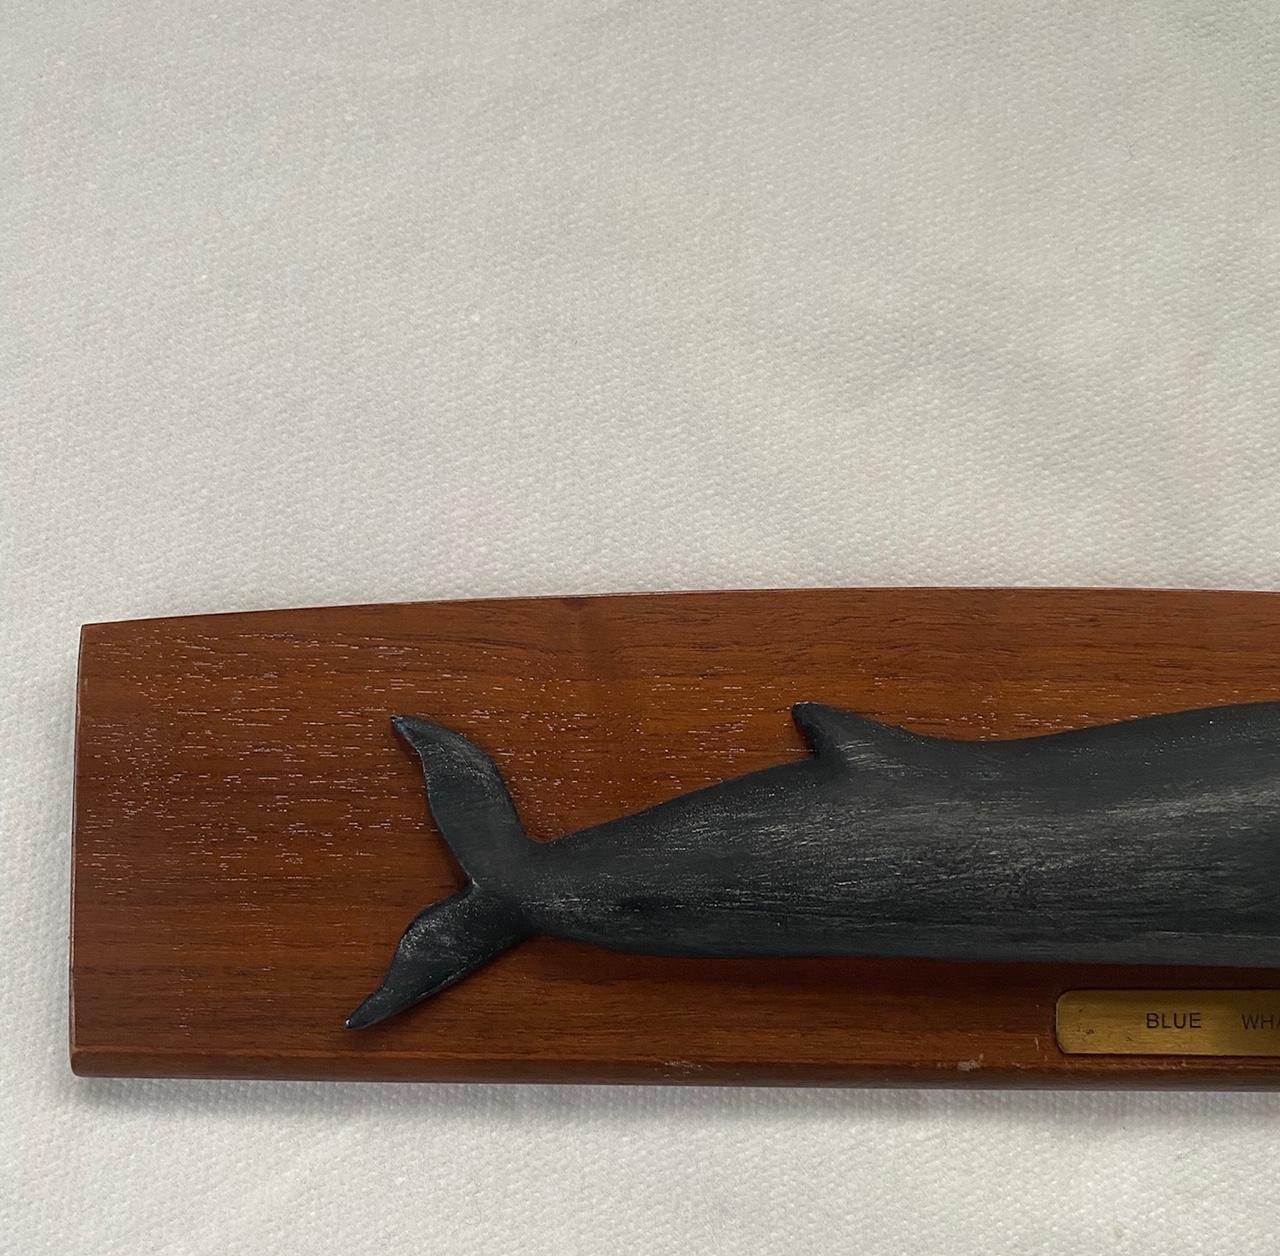 American Early 20th Century Carved Blue Whale Plaque